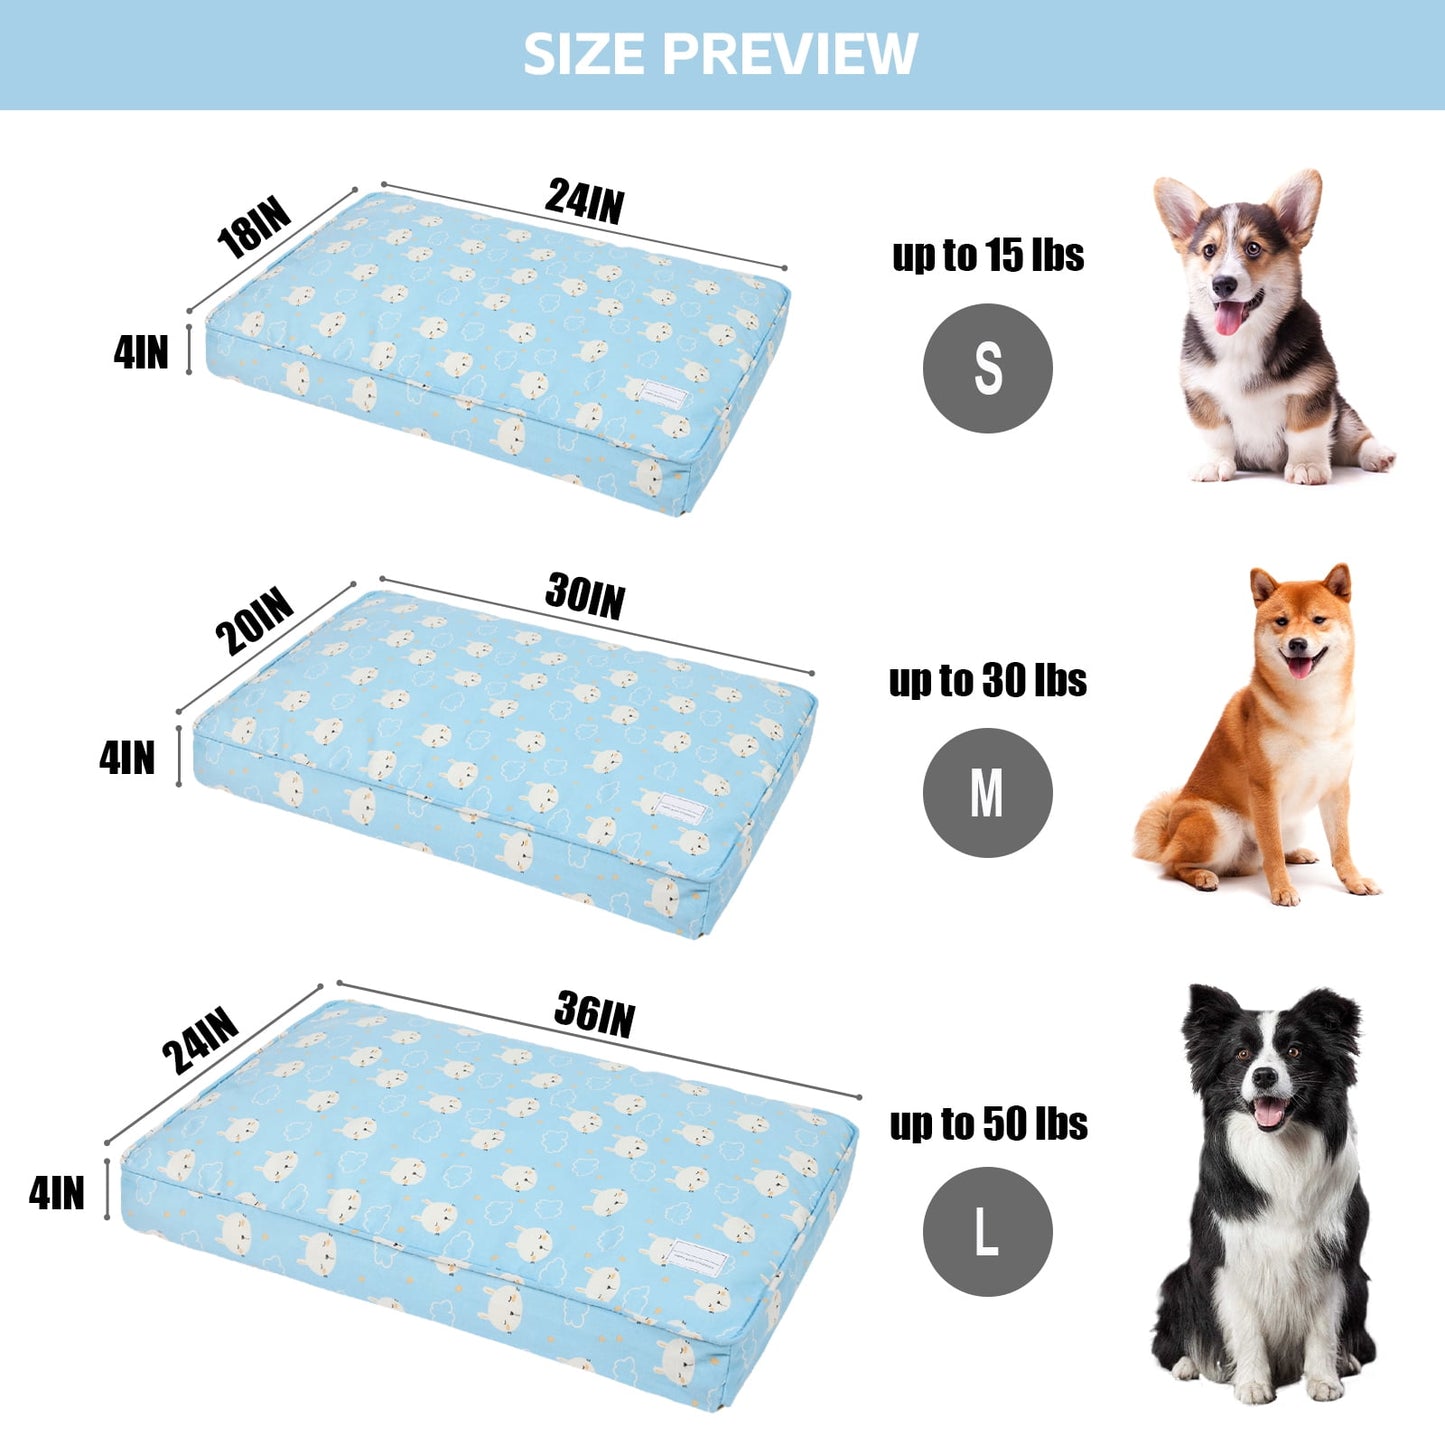 Exclusivo Mezcla Orthopedic Dog Bed for Large Dogs, Shredded Memory Foam Supportive Therapy Fillings Pet Bed, Soft Warm Washable Cat Cuddler Bed, Bunny 36''x24''